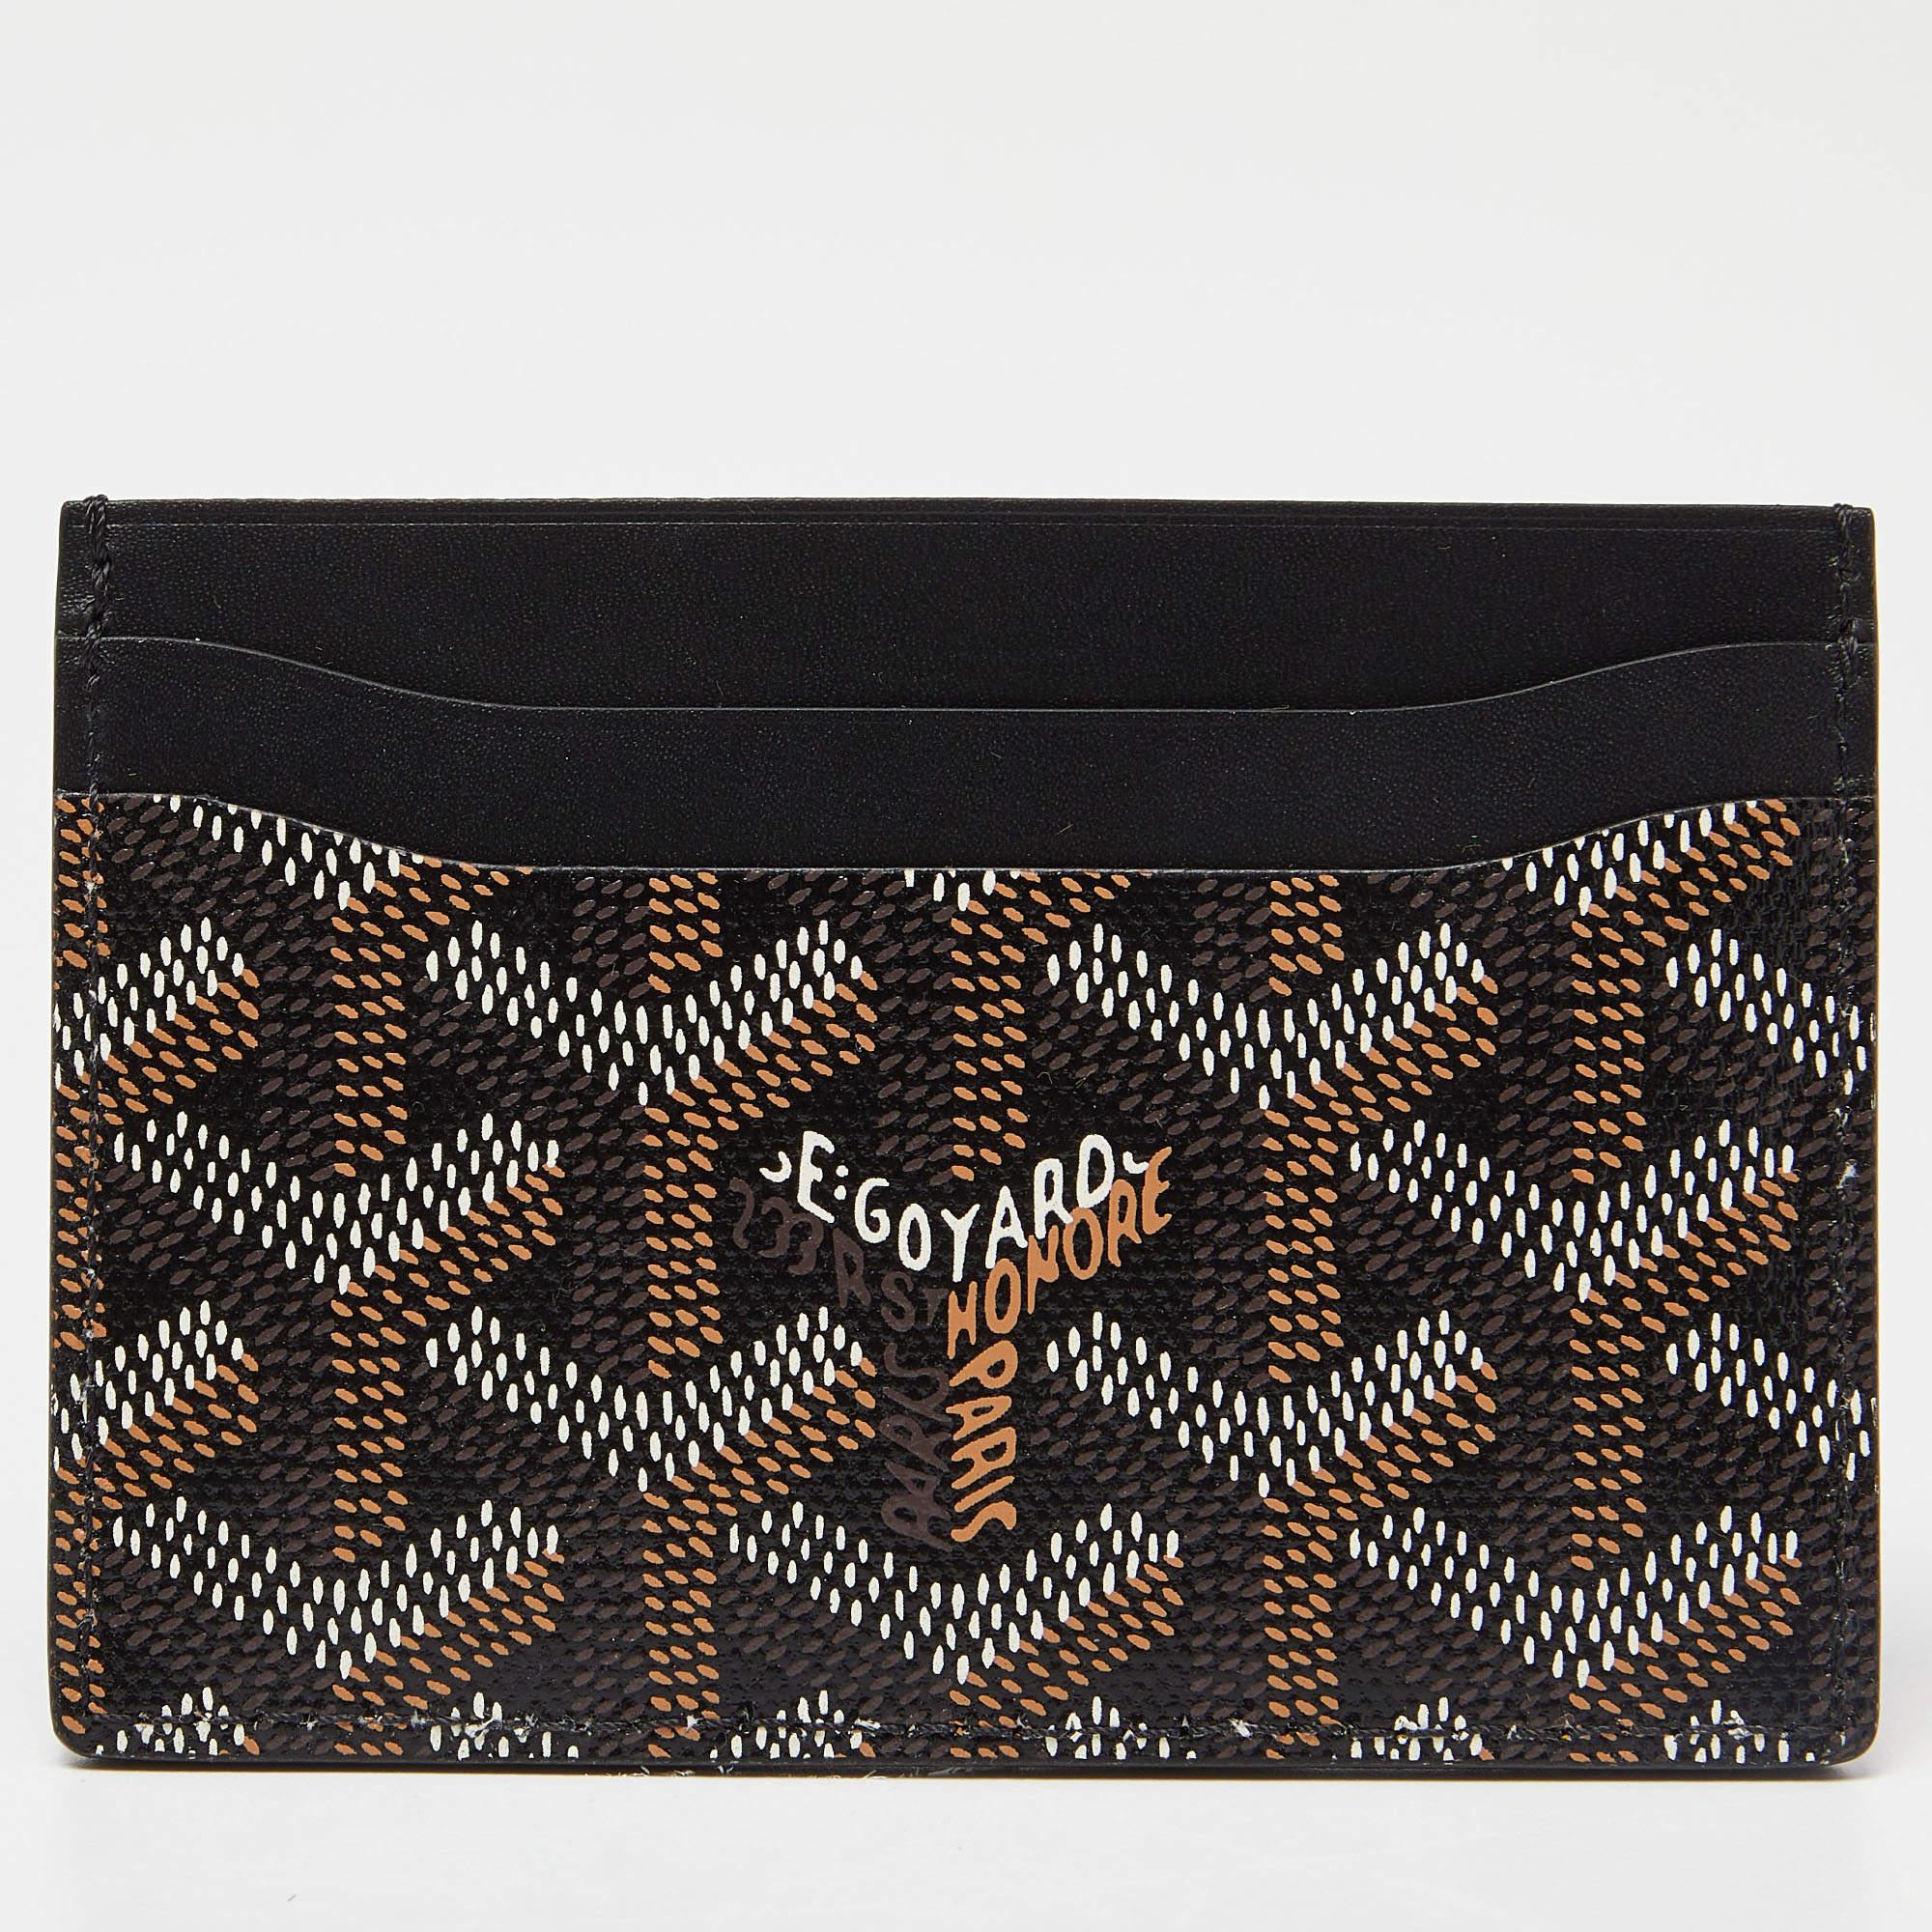 Functional and stylish, this Saint Sulpice cardholder from Goyard is your next best buy. Crafted from the signature Goyardine coated canvas, this brown card holder features four card slots and leather lining on the insides. It is sleek and can be